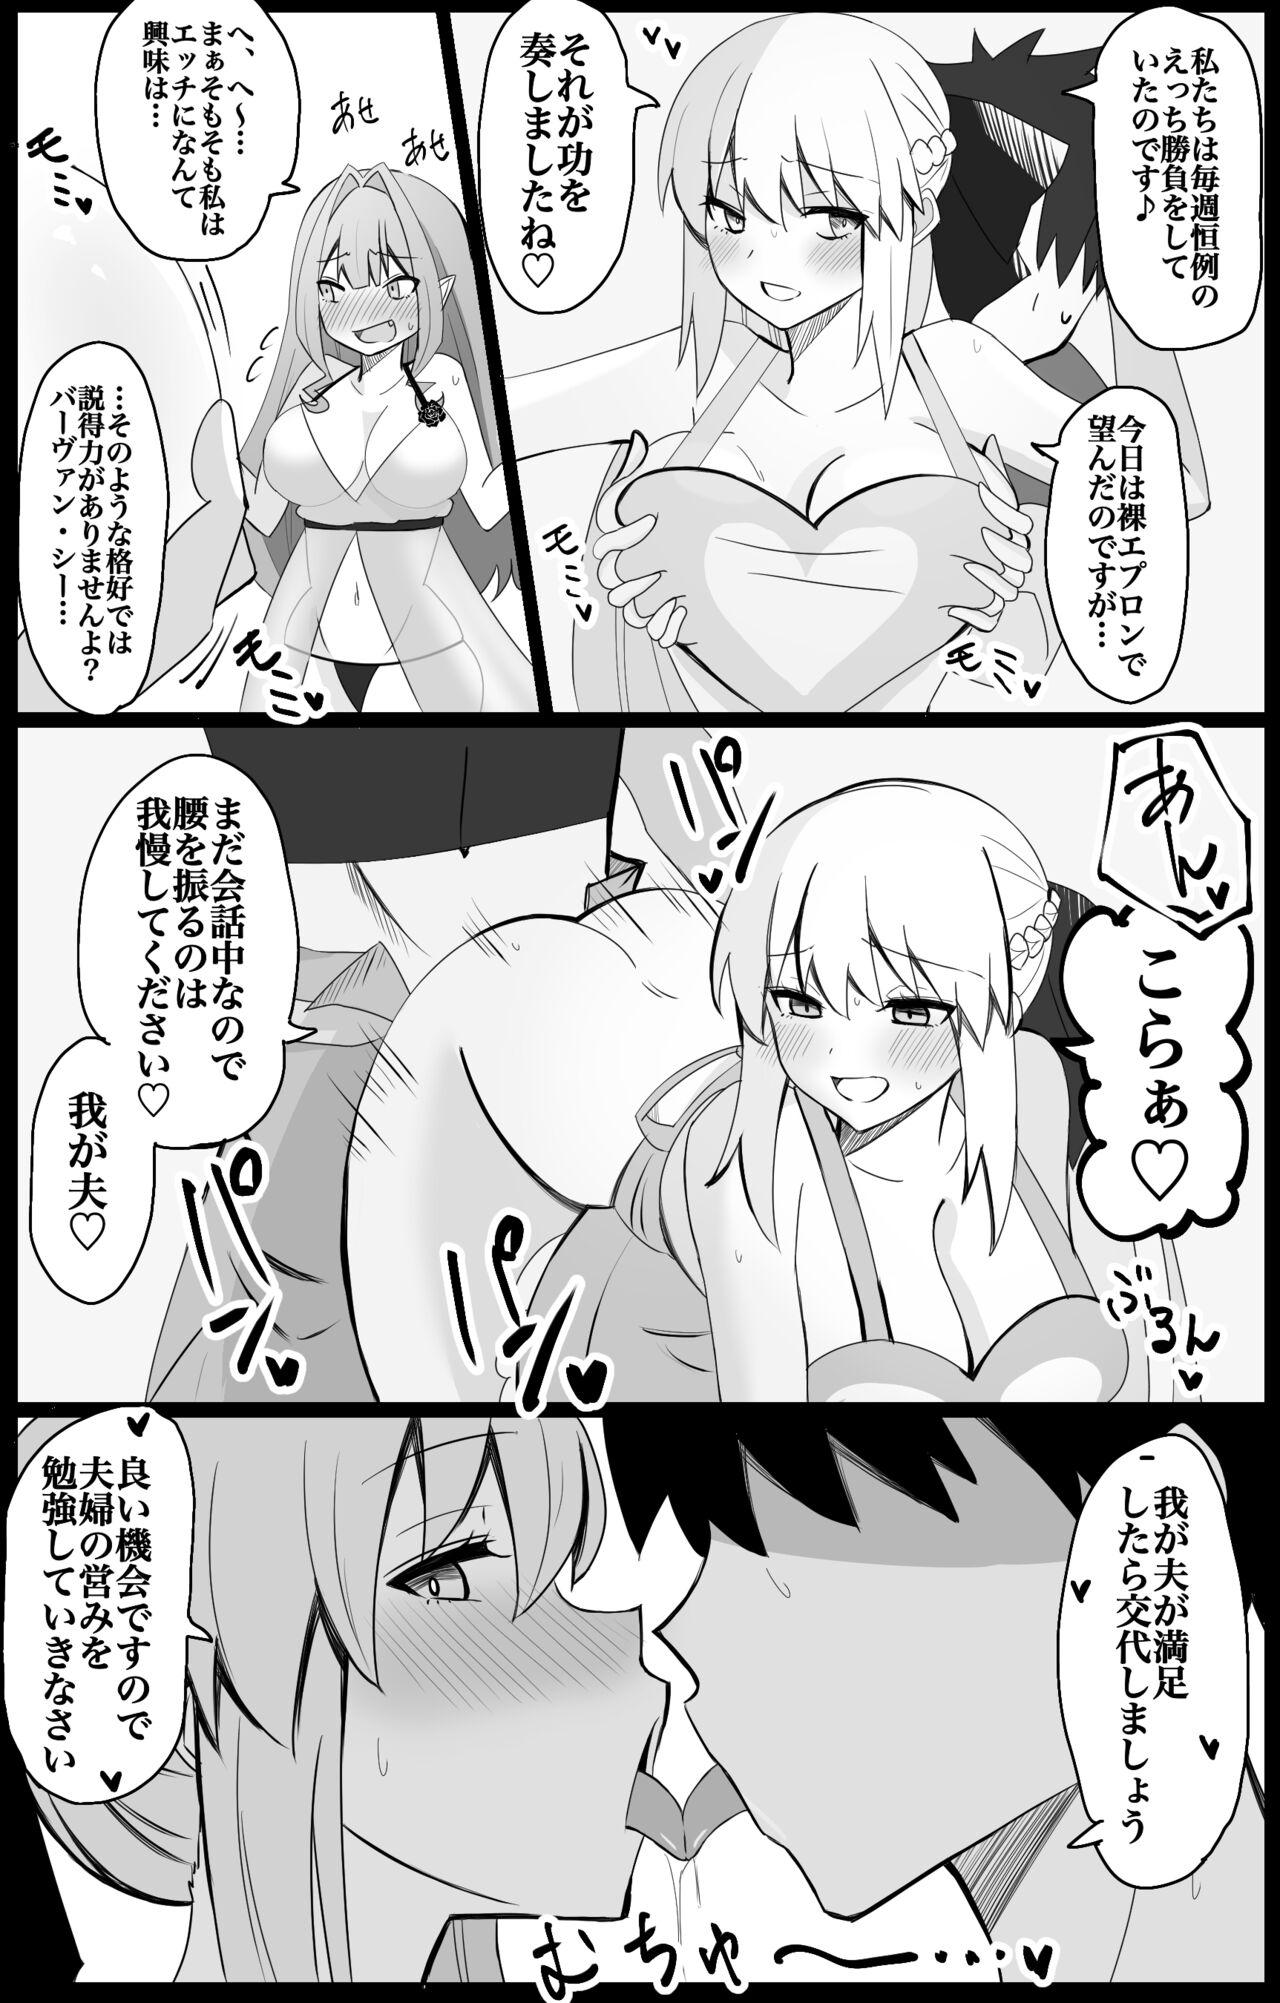 Hard MorTri Oyakodon - Fate grand order Jerkoff - Page 2